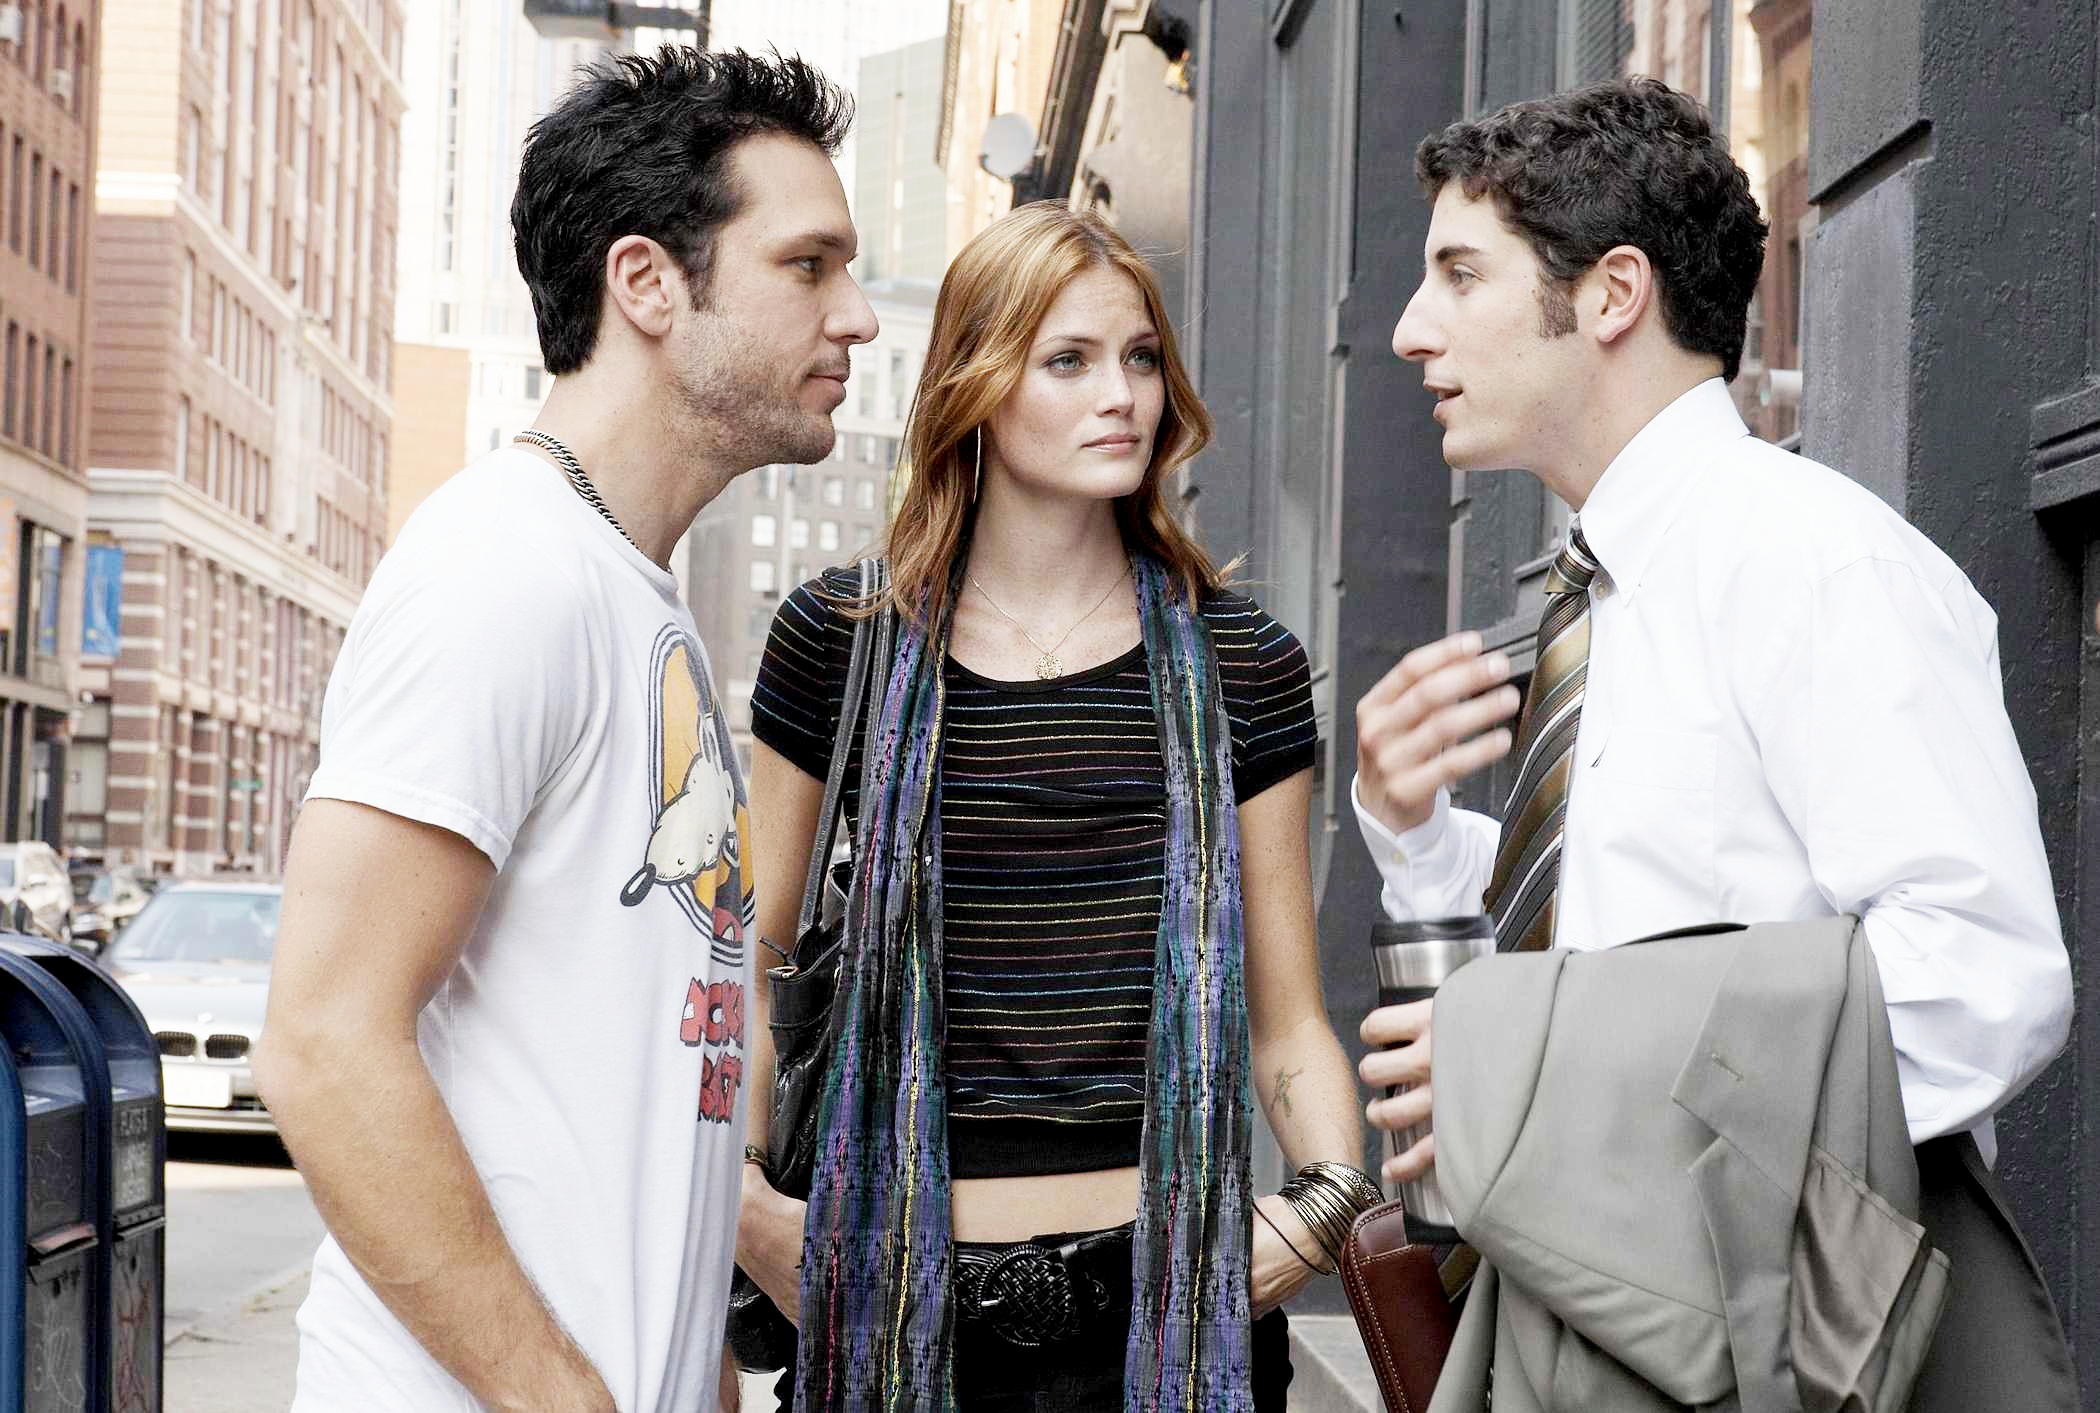 Dane Cook, Mini Anden and Jason Biggs in Lions Gate Films' My Best Friend's Girl (2008). Photo credit by Claire Folger.